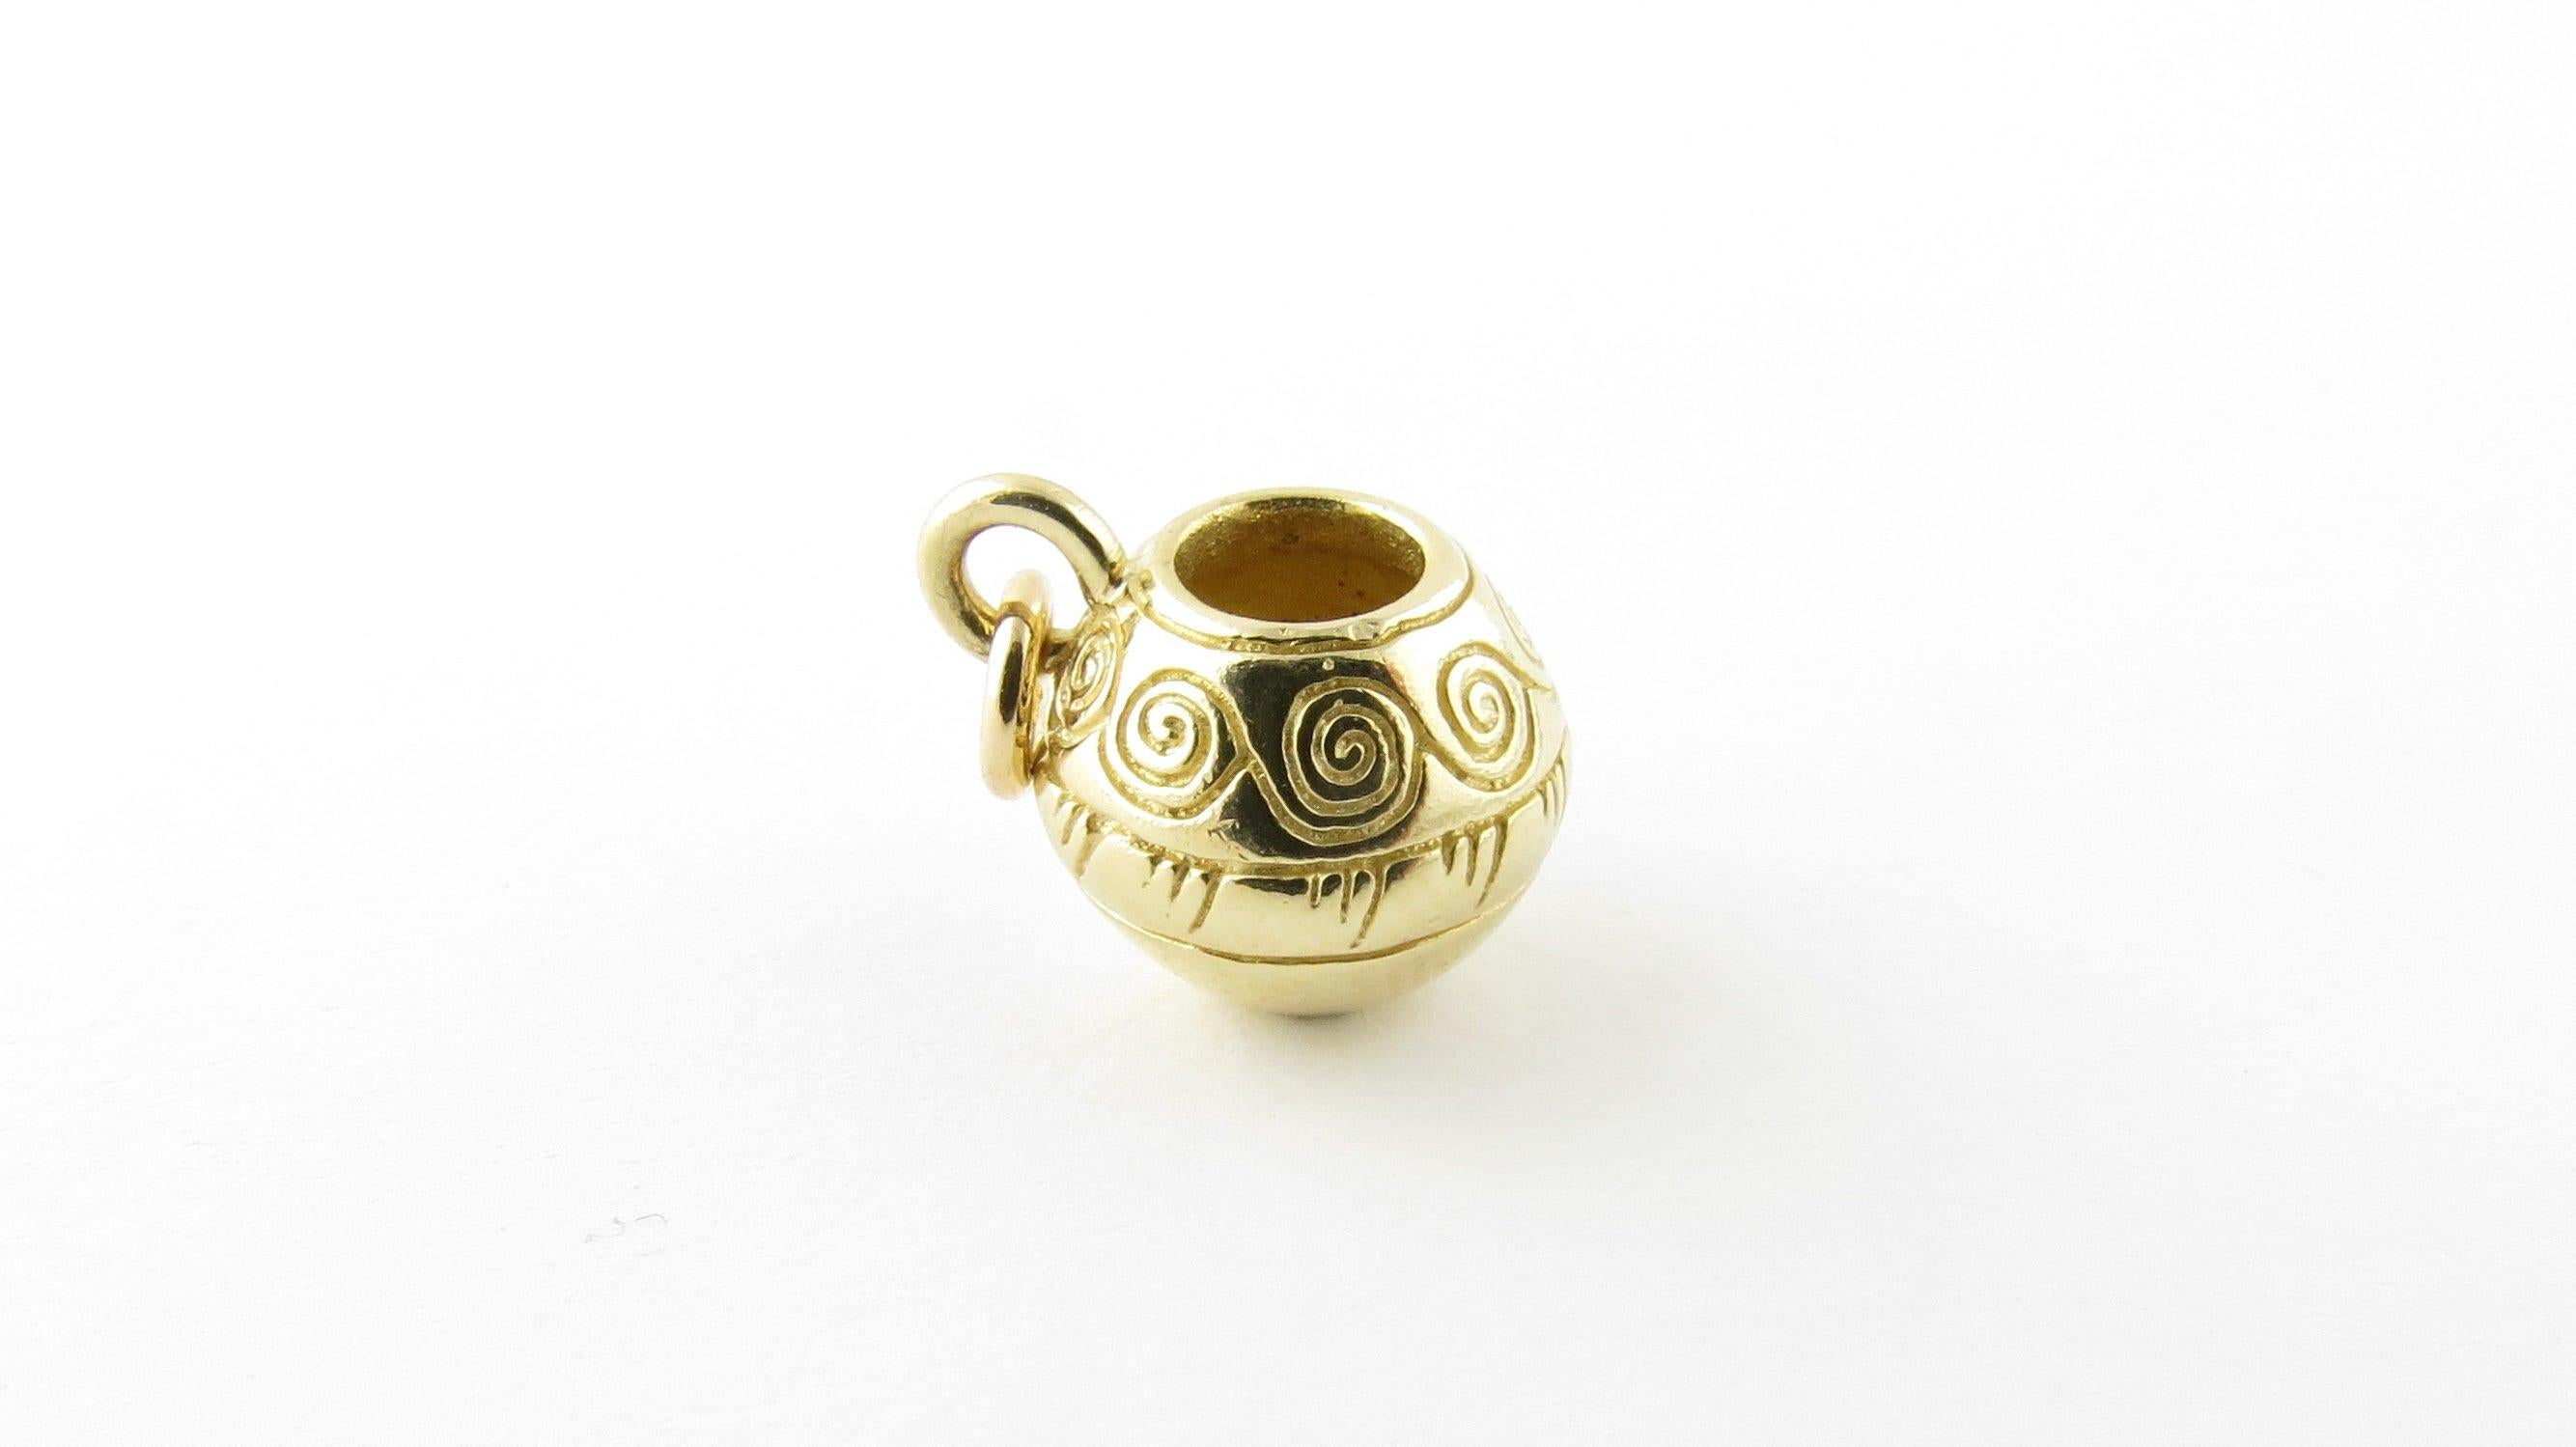 Vintage 14 Karat Yellow Gold Decorative Urn Charm- This lovely 3D charm features a miniature urn meticulously detailed in 14K yellow gold. Size: 10 mm x 10 mm (actual charm) Weight: 2.1 dwt. / 3.3 gr. Stamped: Acid tested for 14K gold. Very good